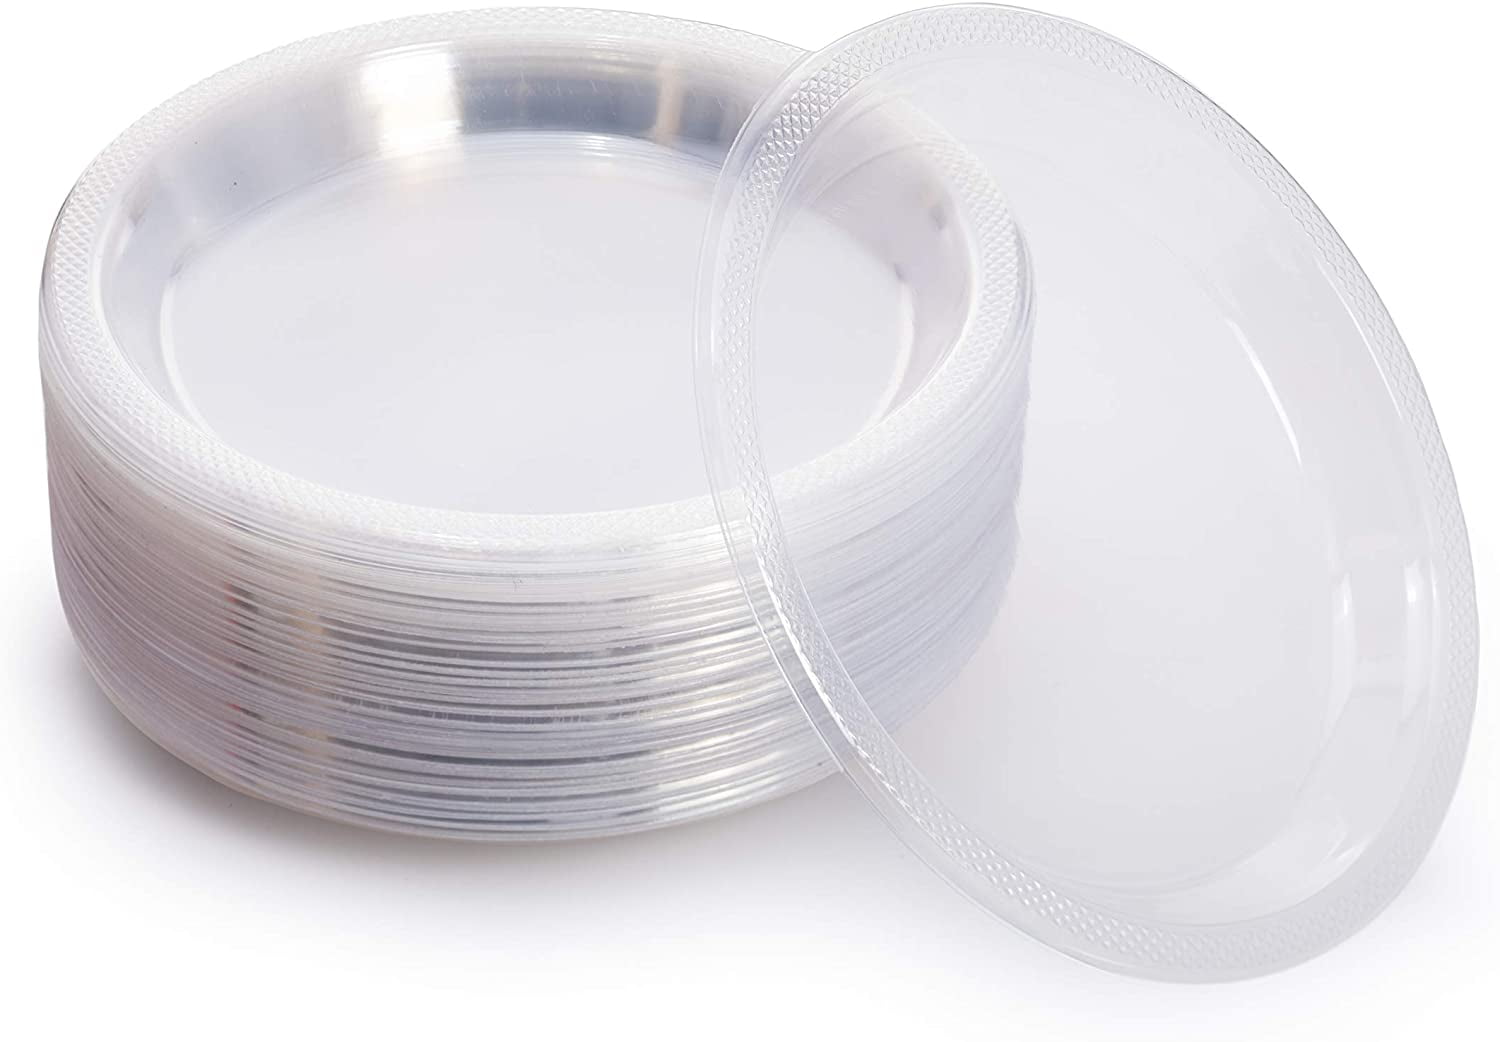 Plasticpro 7 inch Premium Crystal Clear Disposable Plastic Party Plate Pack of 80